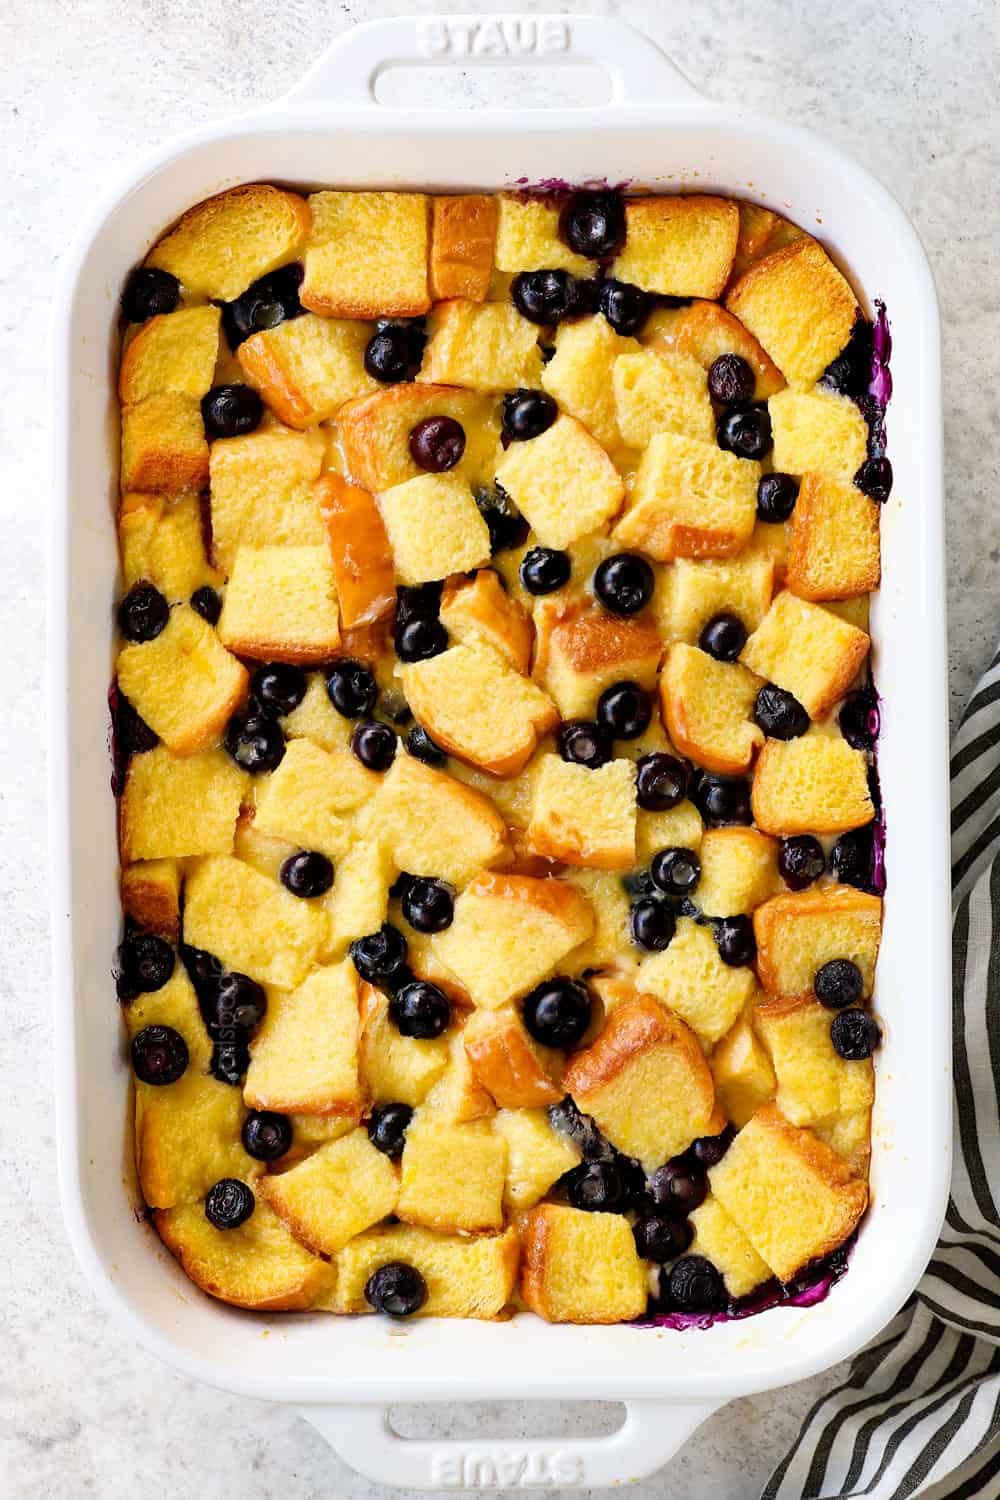 showing how to make blueberry French toast casserole by baking until golden